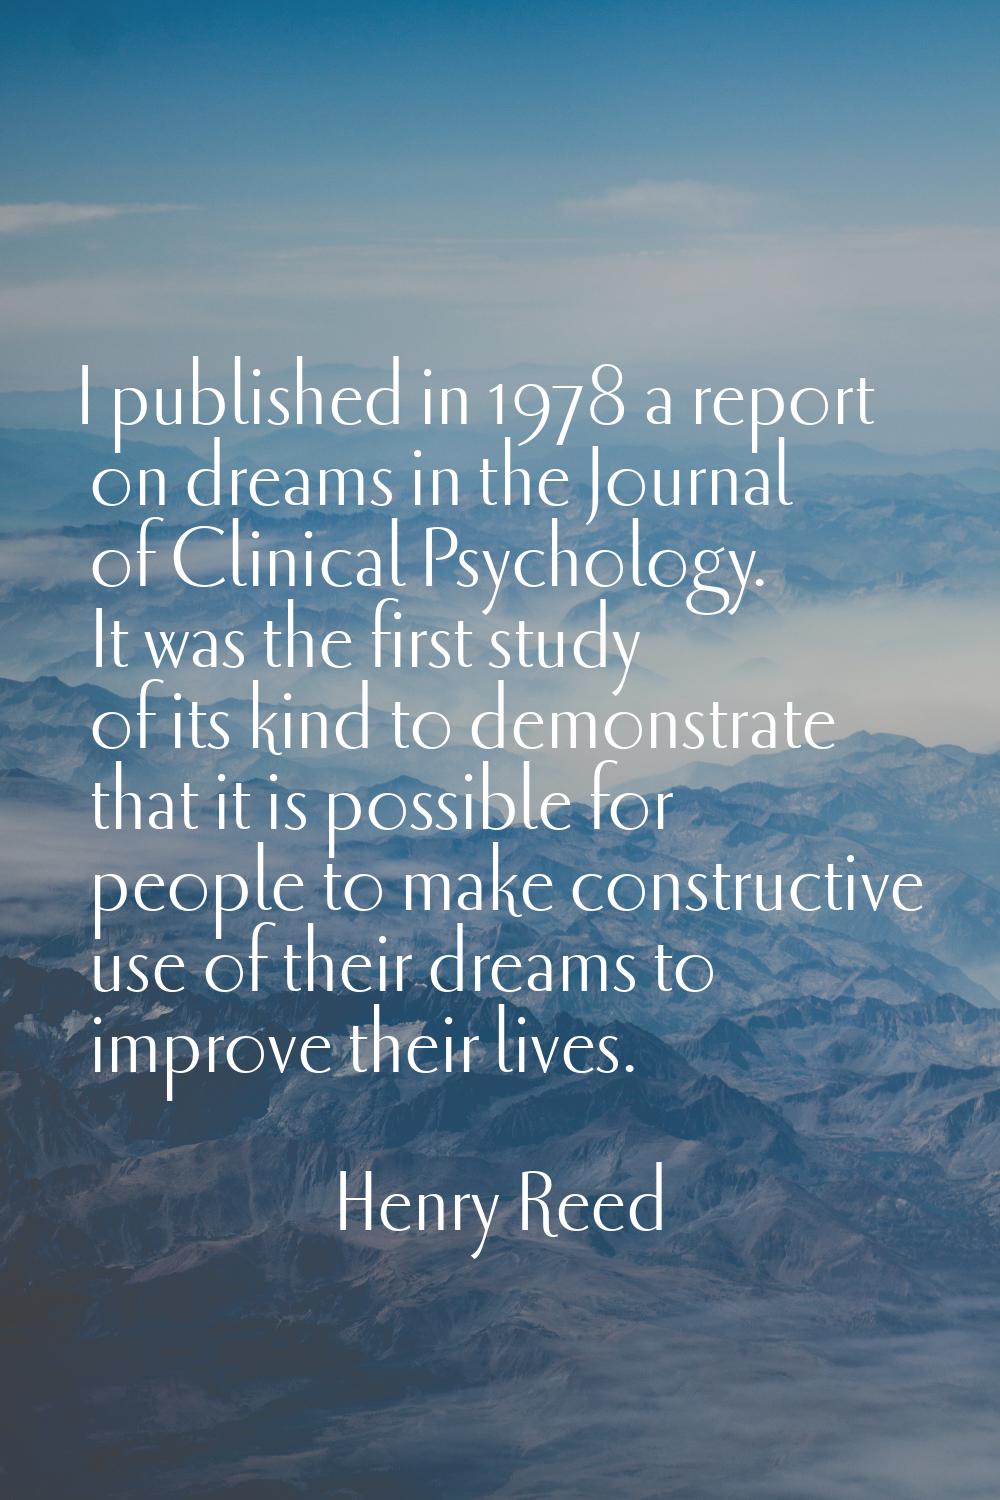 I published in 1978 a report on dreams in the Journal of Clinical Psychology. It was the first stud